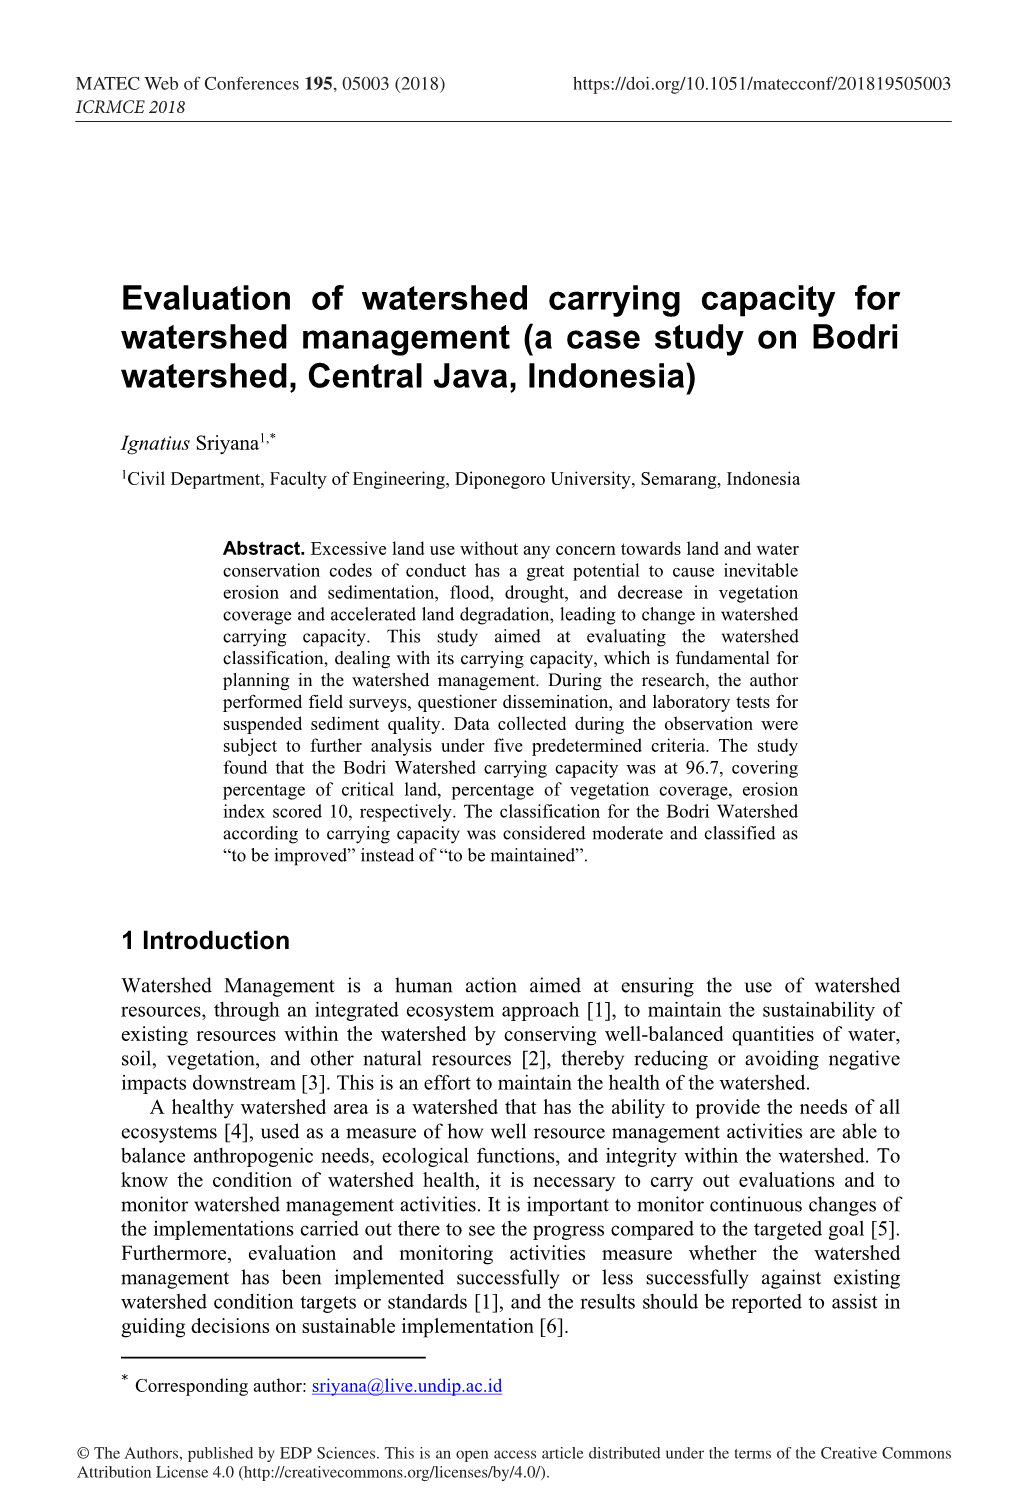 Evaluation of Watershed Carrying Capacity for Watershed Management (A Case Study on Bodri Watershed, Central Java, Indonesia)